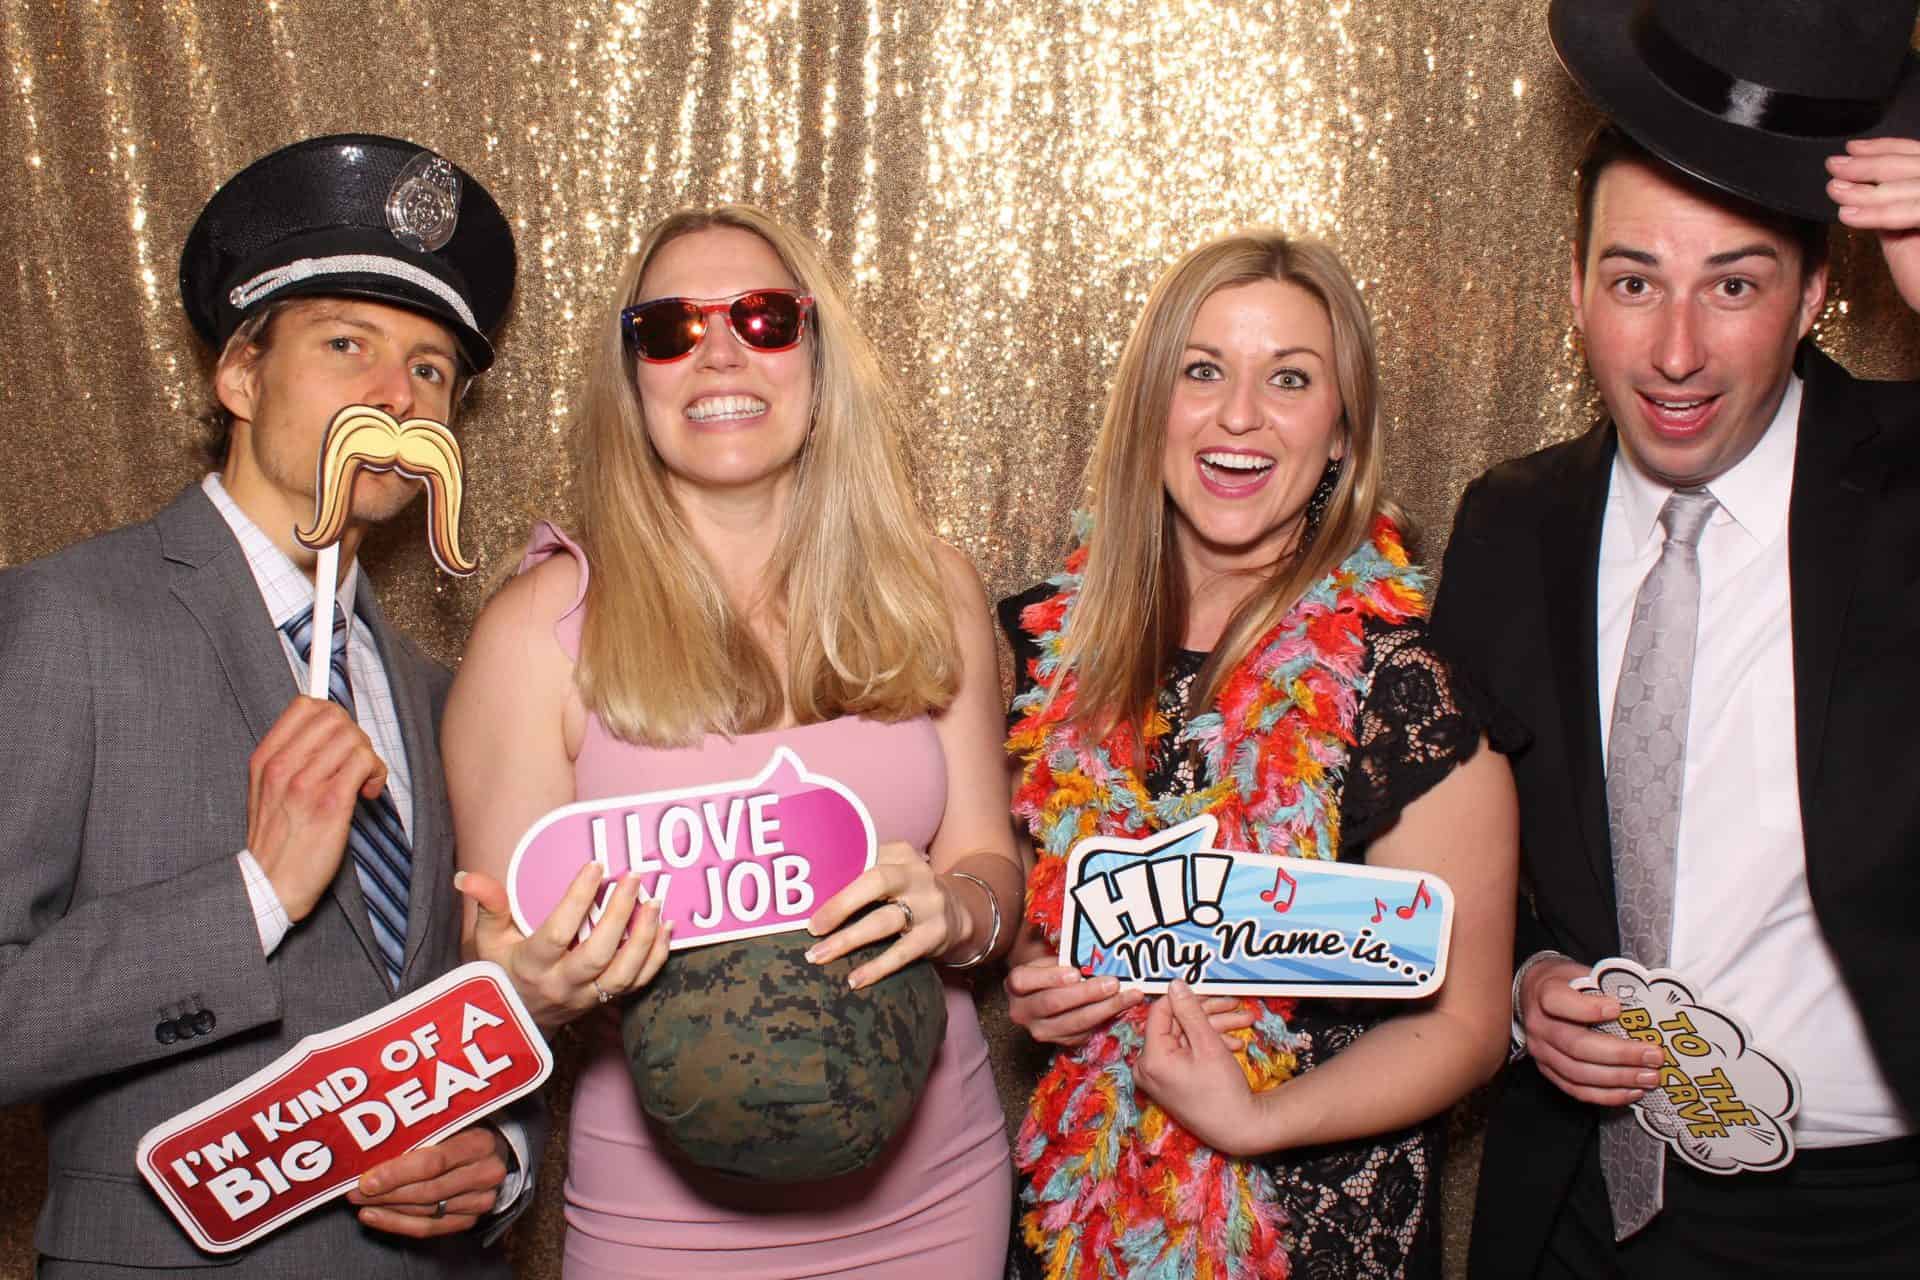 Tips for reserving a photo booth